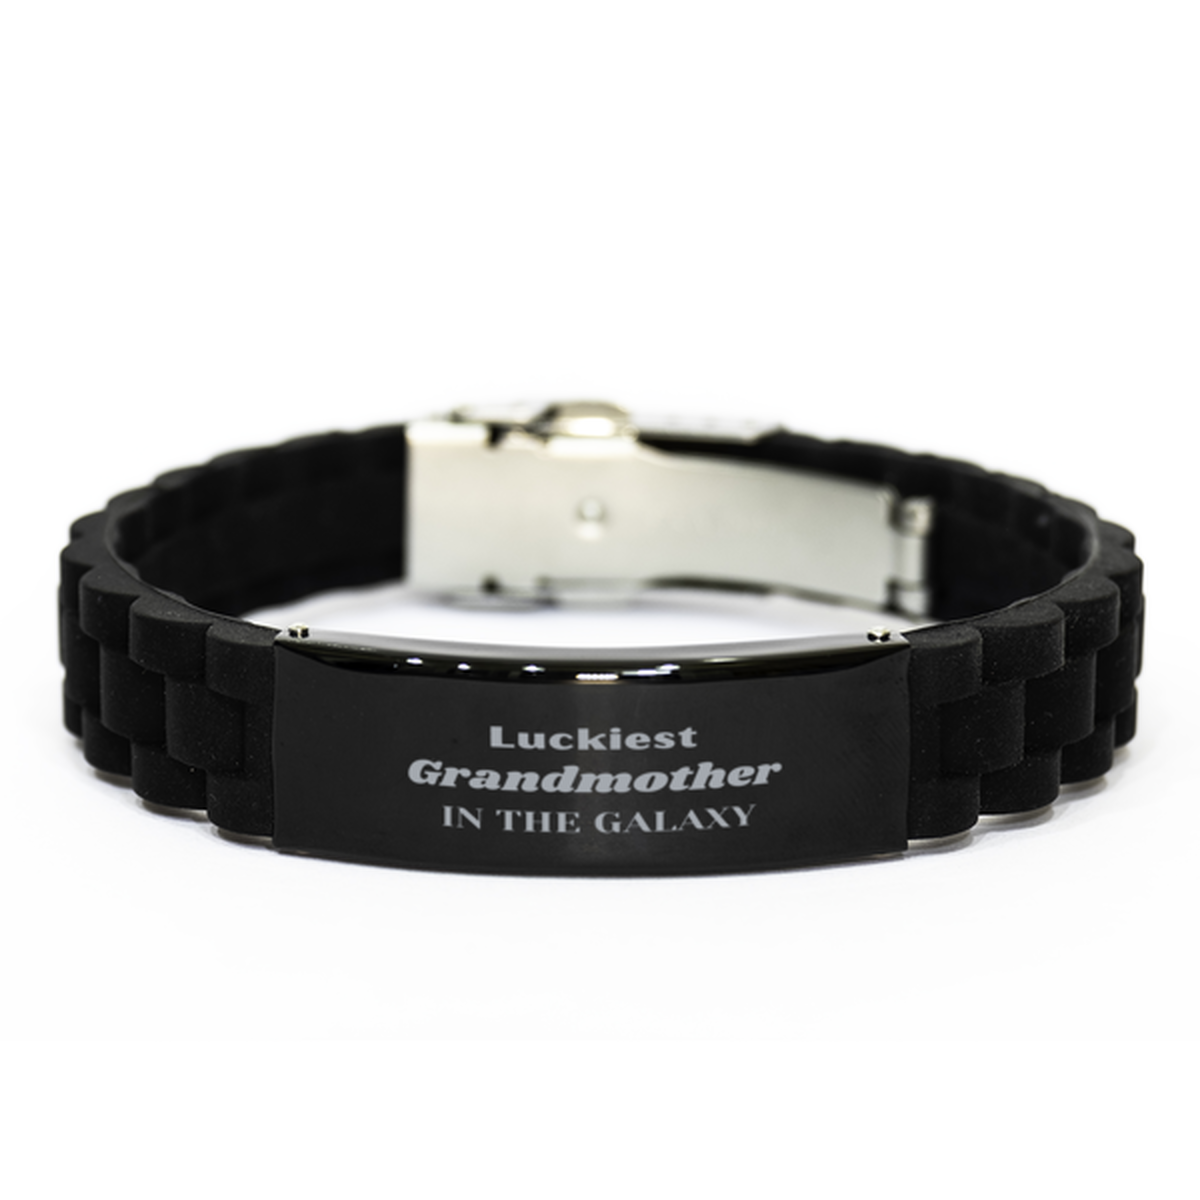 Luckiest Grandmother in the Galaxy, To My Grandmother Engraved Gifts, Christmas Grandmother Black Glidelock Clasp Bracelet Gifts, X-mas Birthday Unique Gifts For Grandmother Men Women